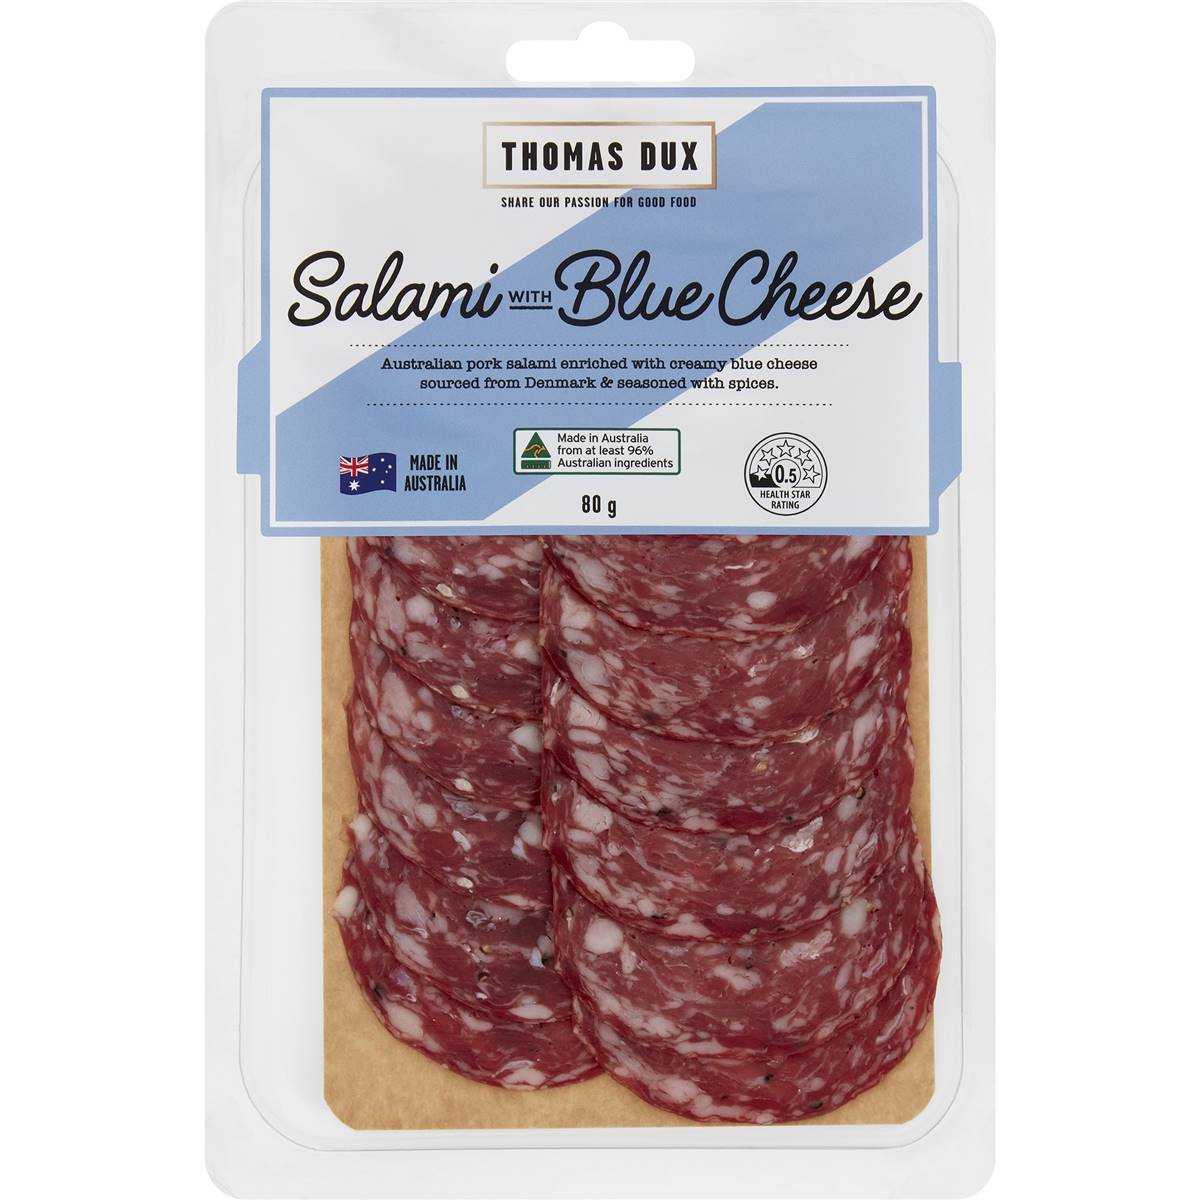 Calories in Thomas Dux Salami With Blue Cheese